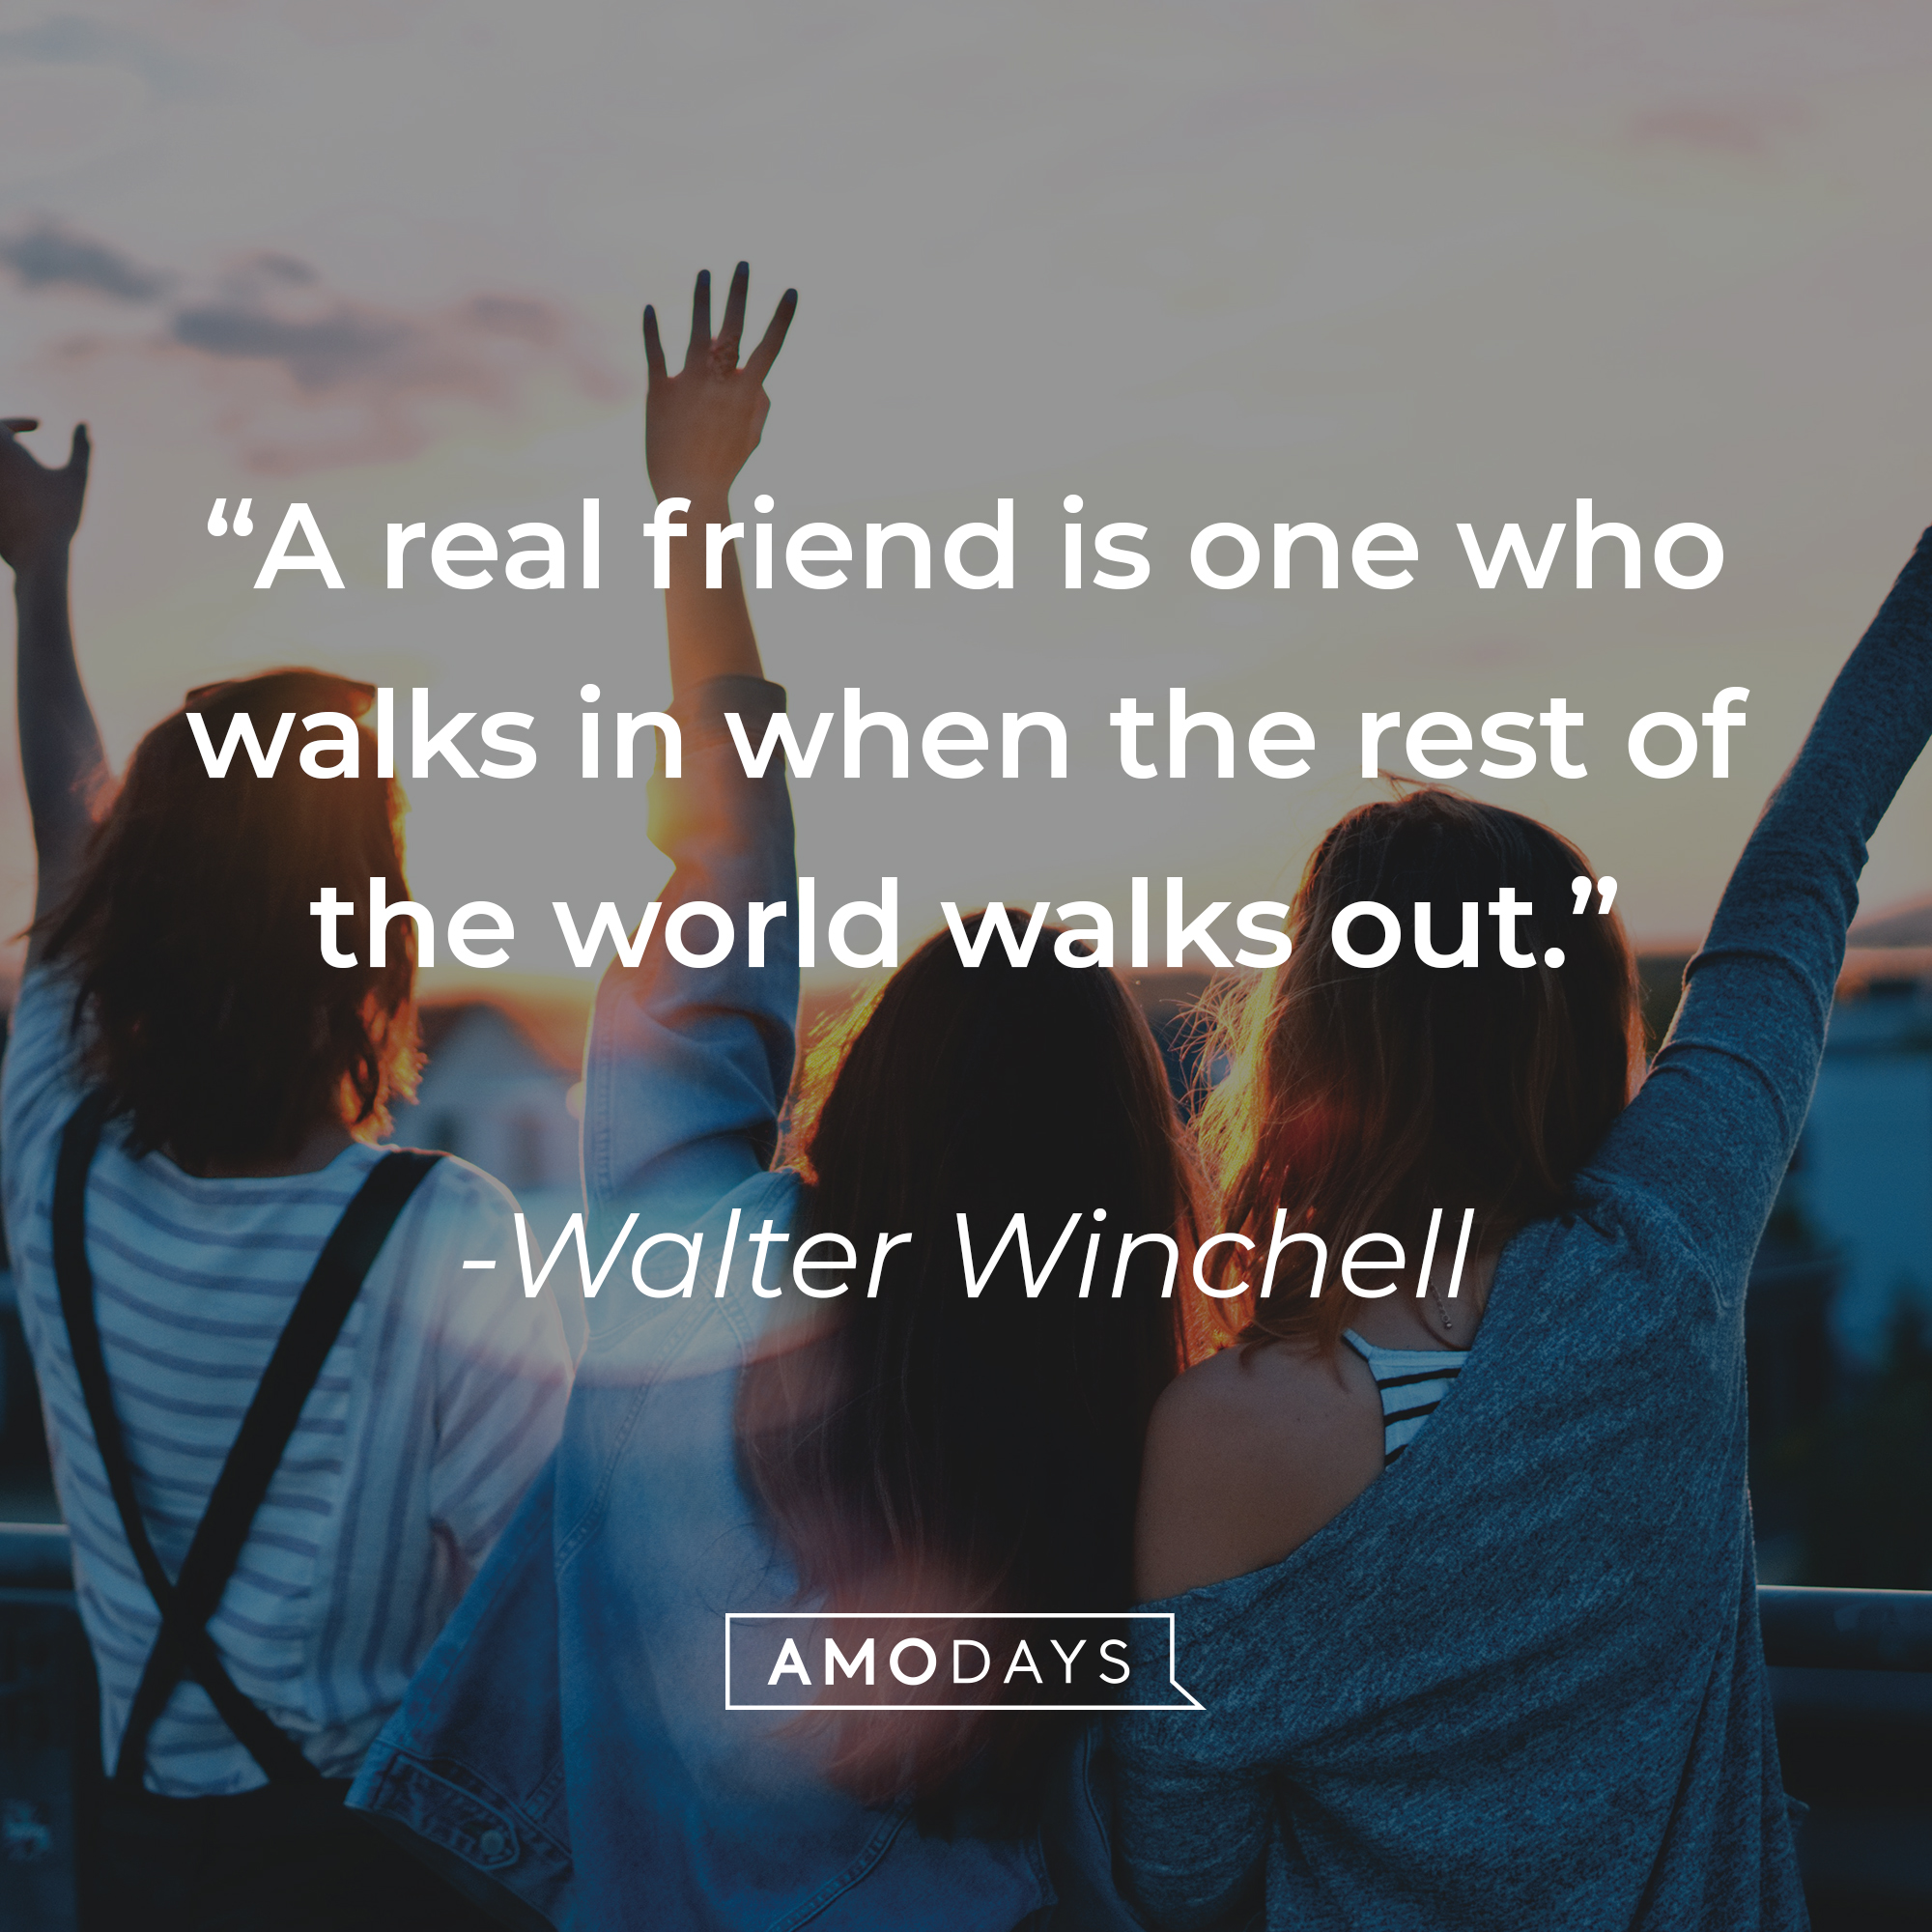 Walter Winchell's quote:  "A real friend is one who walks in when the rest of the world walks out." | Source: Unsplash